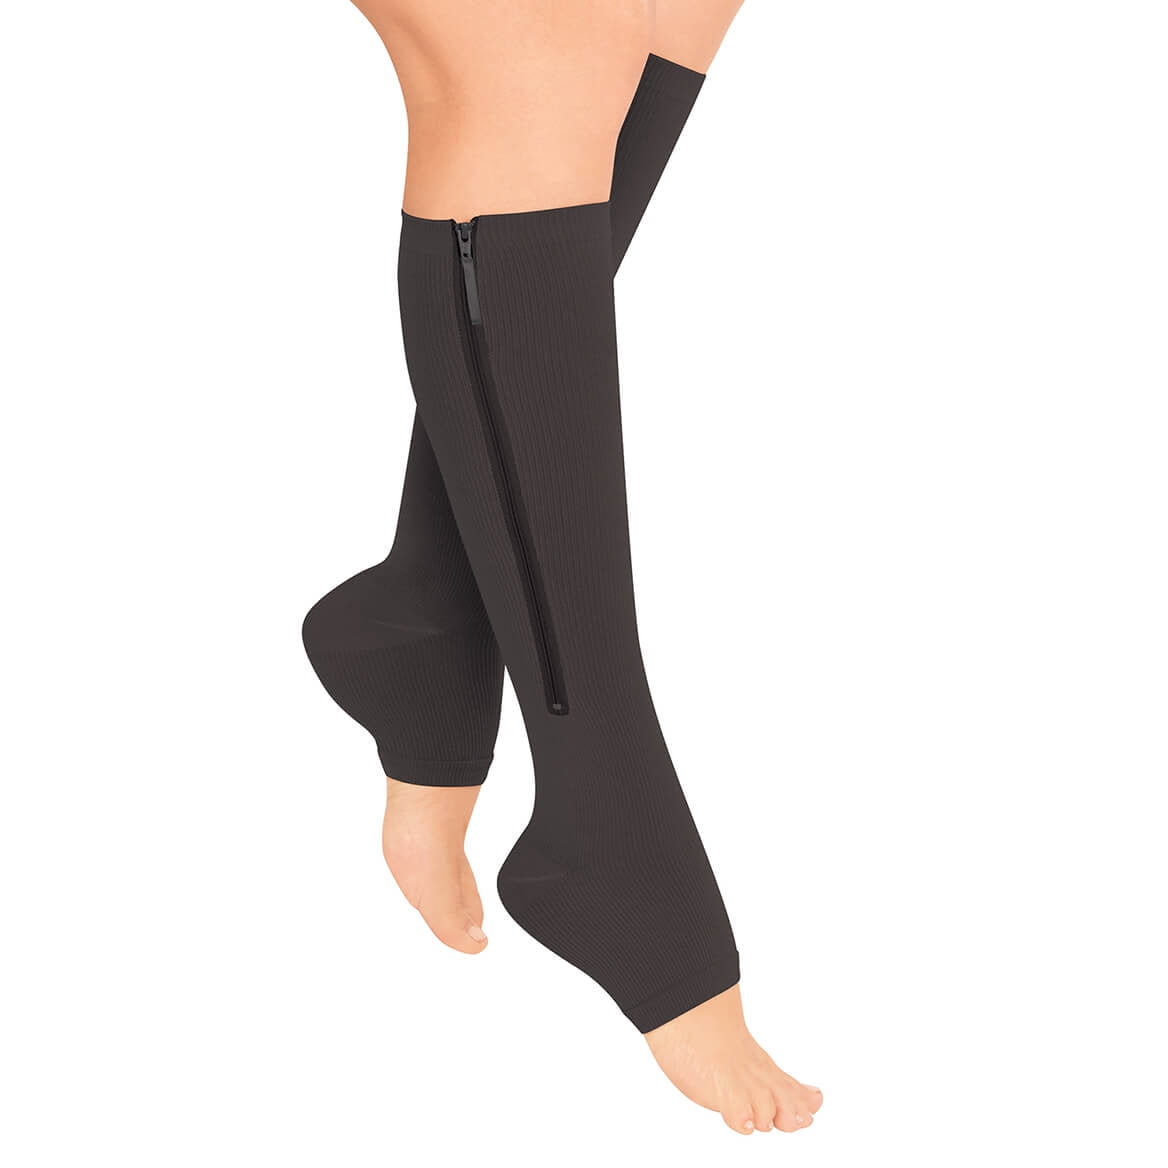 Zippered Compression Stockings, Black, S/M 